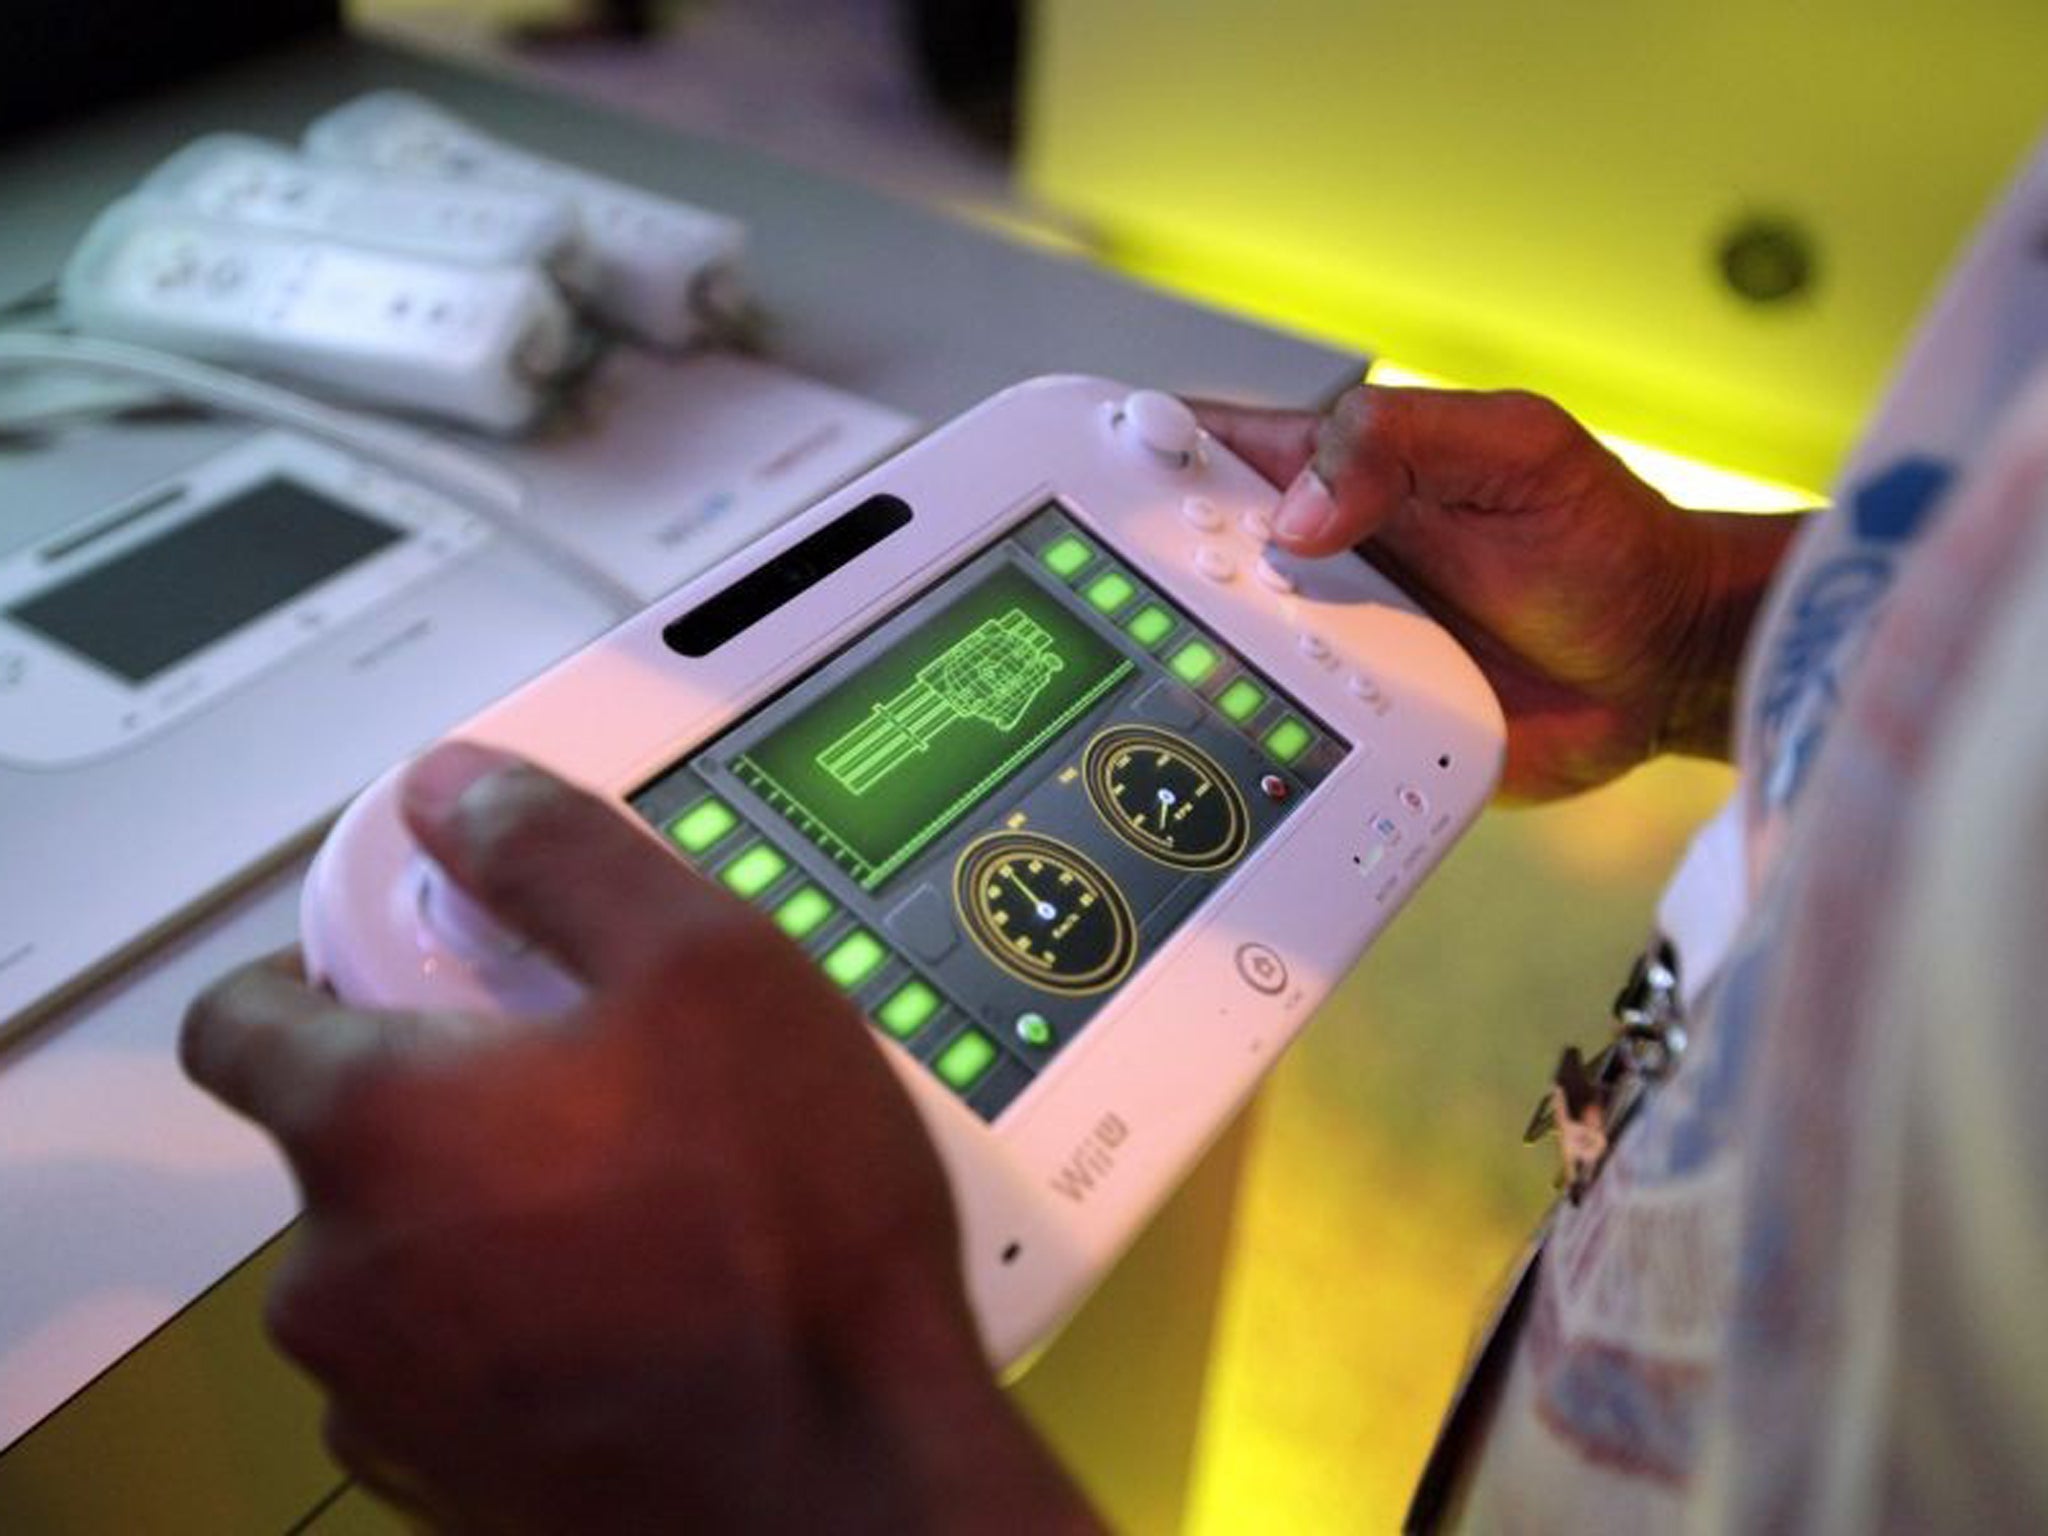 An attendee plays a video game using Nintendo's Wii U controller